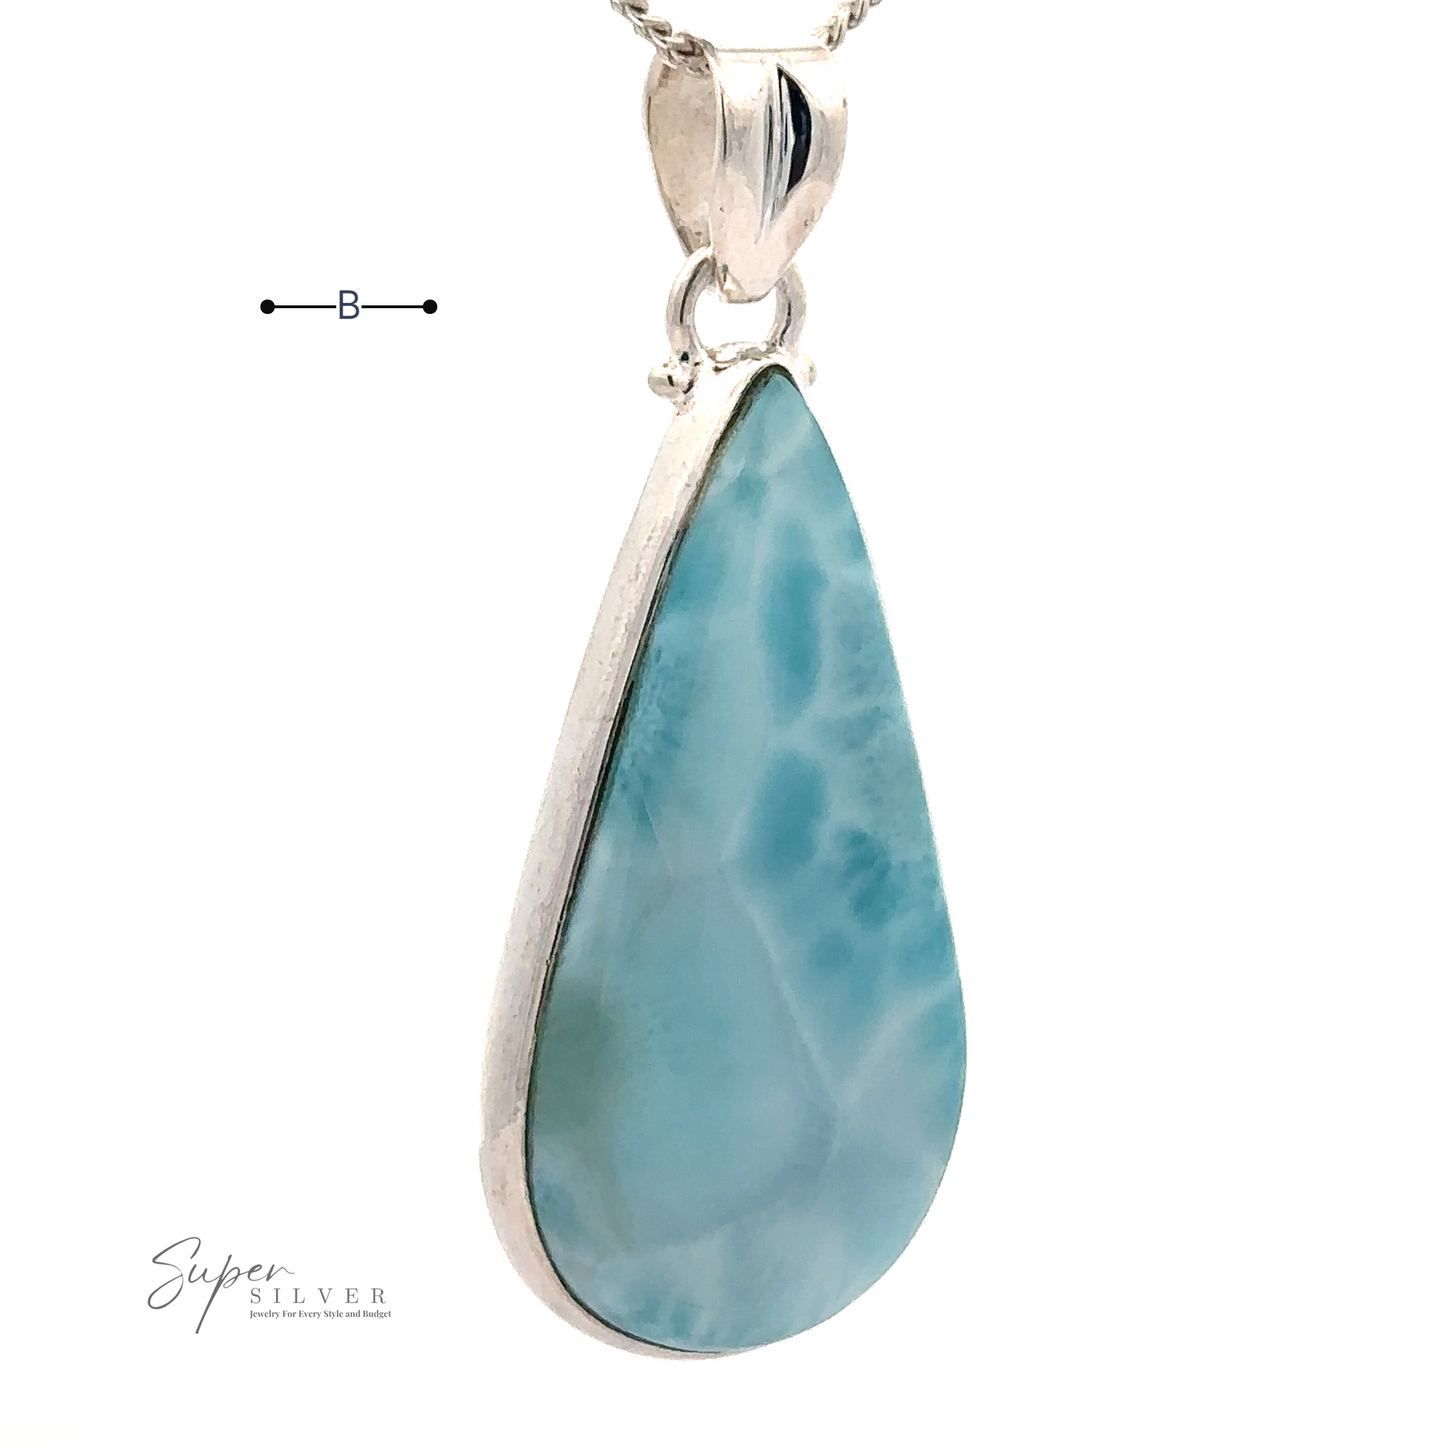 
                  
                    A silver necklace with a large, teardrop-shaped Larger Teardrop Larimar Pendant. The sterling silver pendant showcases a polished light blue surface with natural white marbling.
                  
                